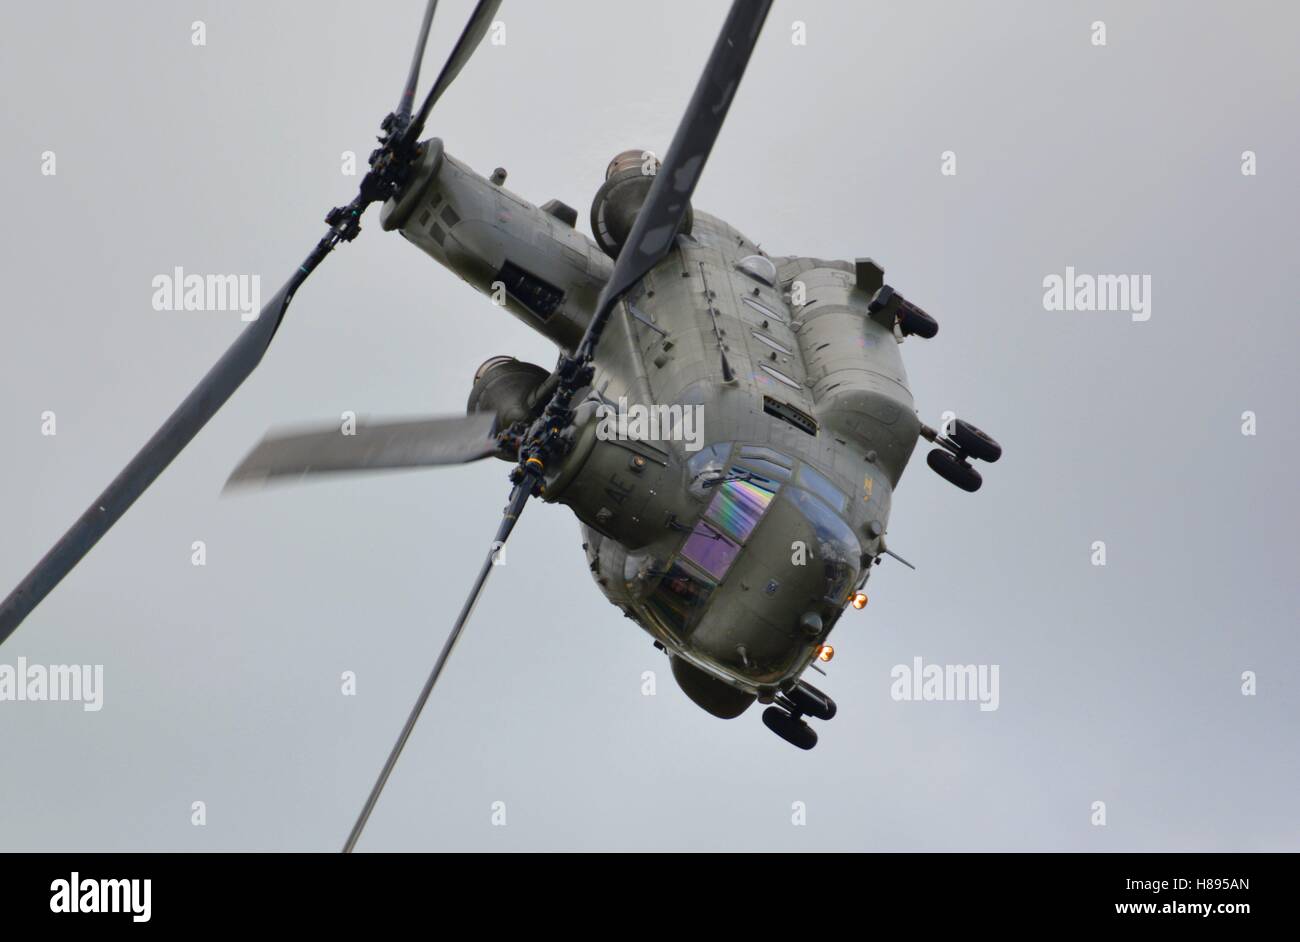 Ch-47 diving down Stock Photo